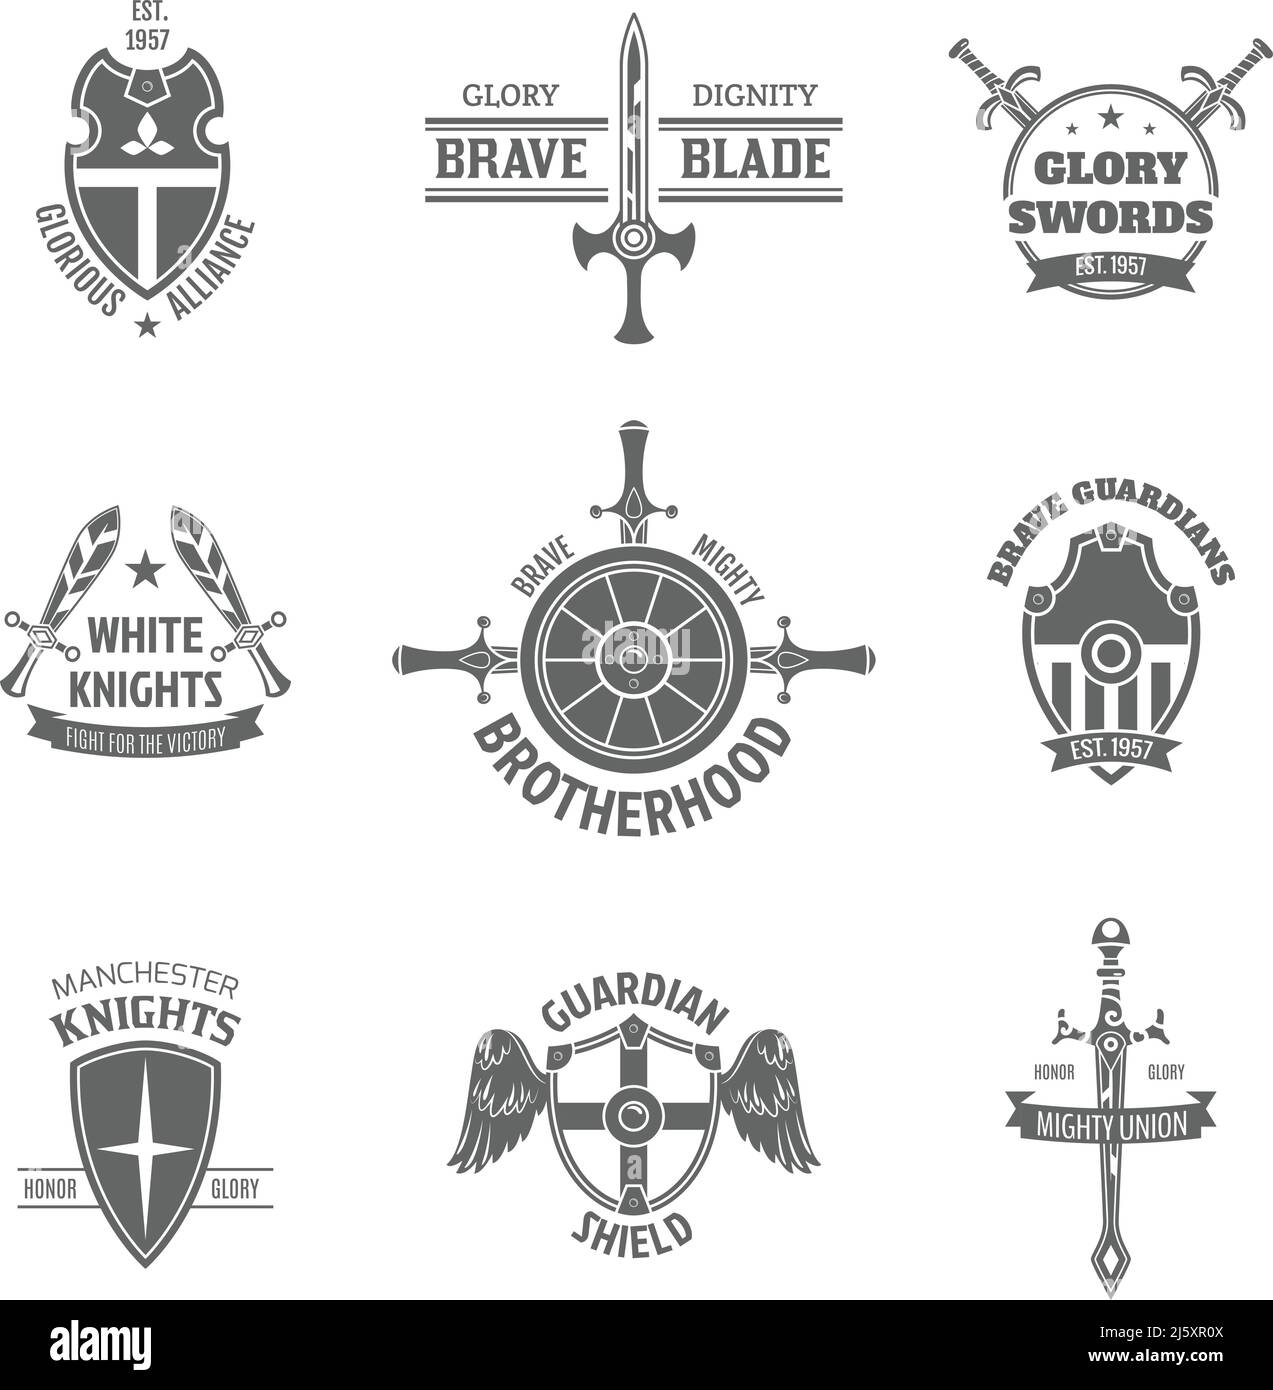 Vintage heraldic coat of arms labels set with swords and guardian shields emblems icons isolated vector illustration Stock Vector